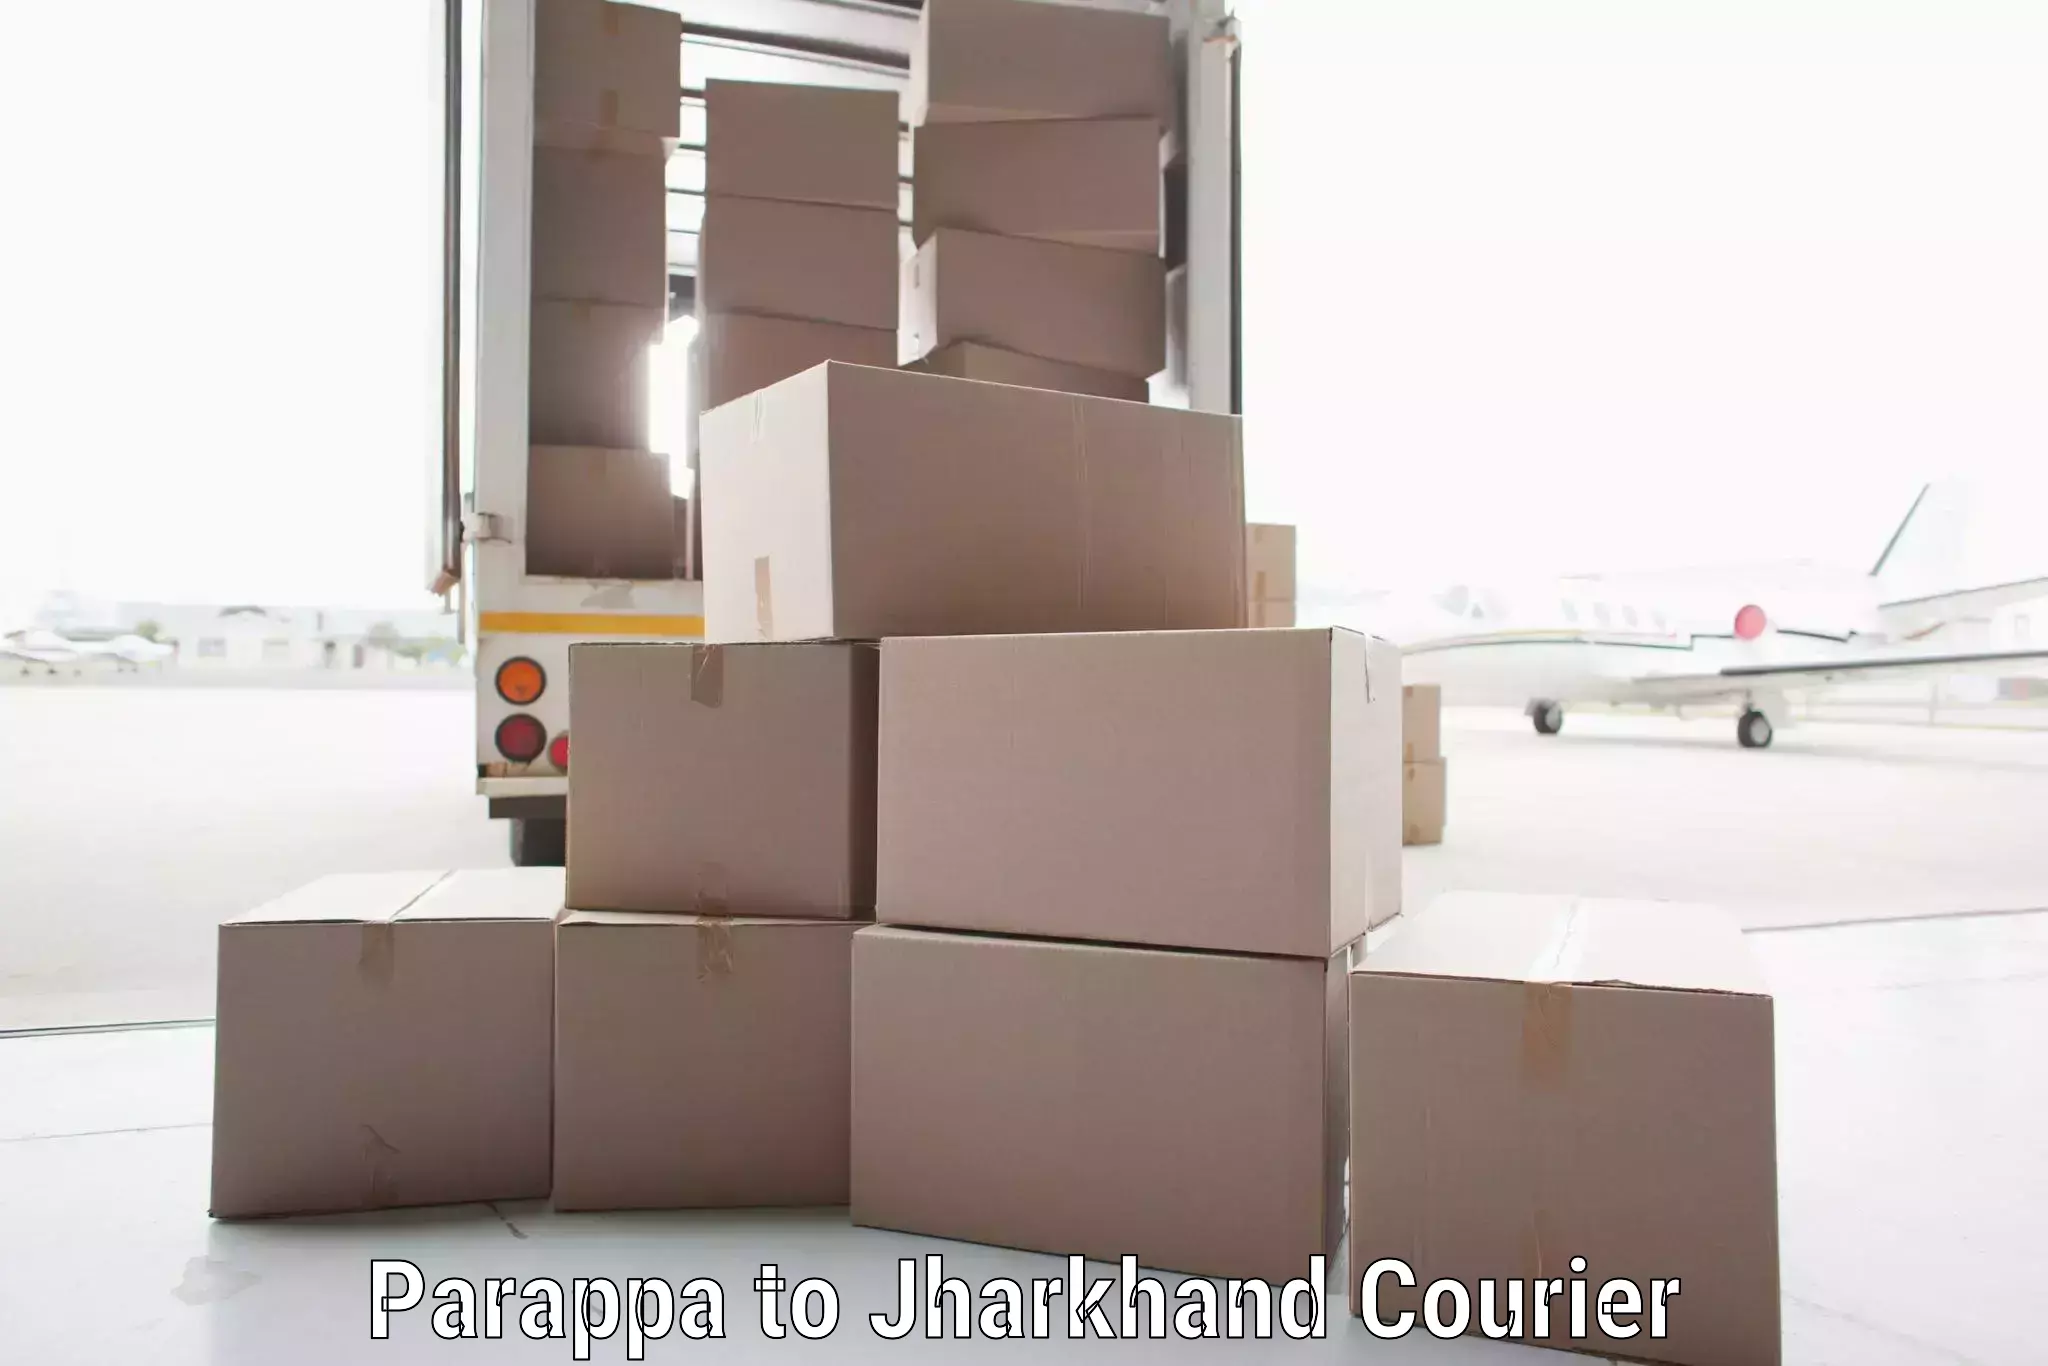 Domestic courier Parappa to Latehar